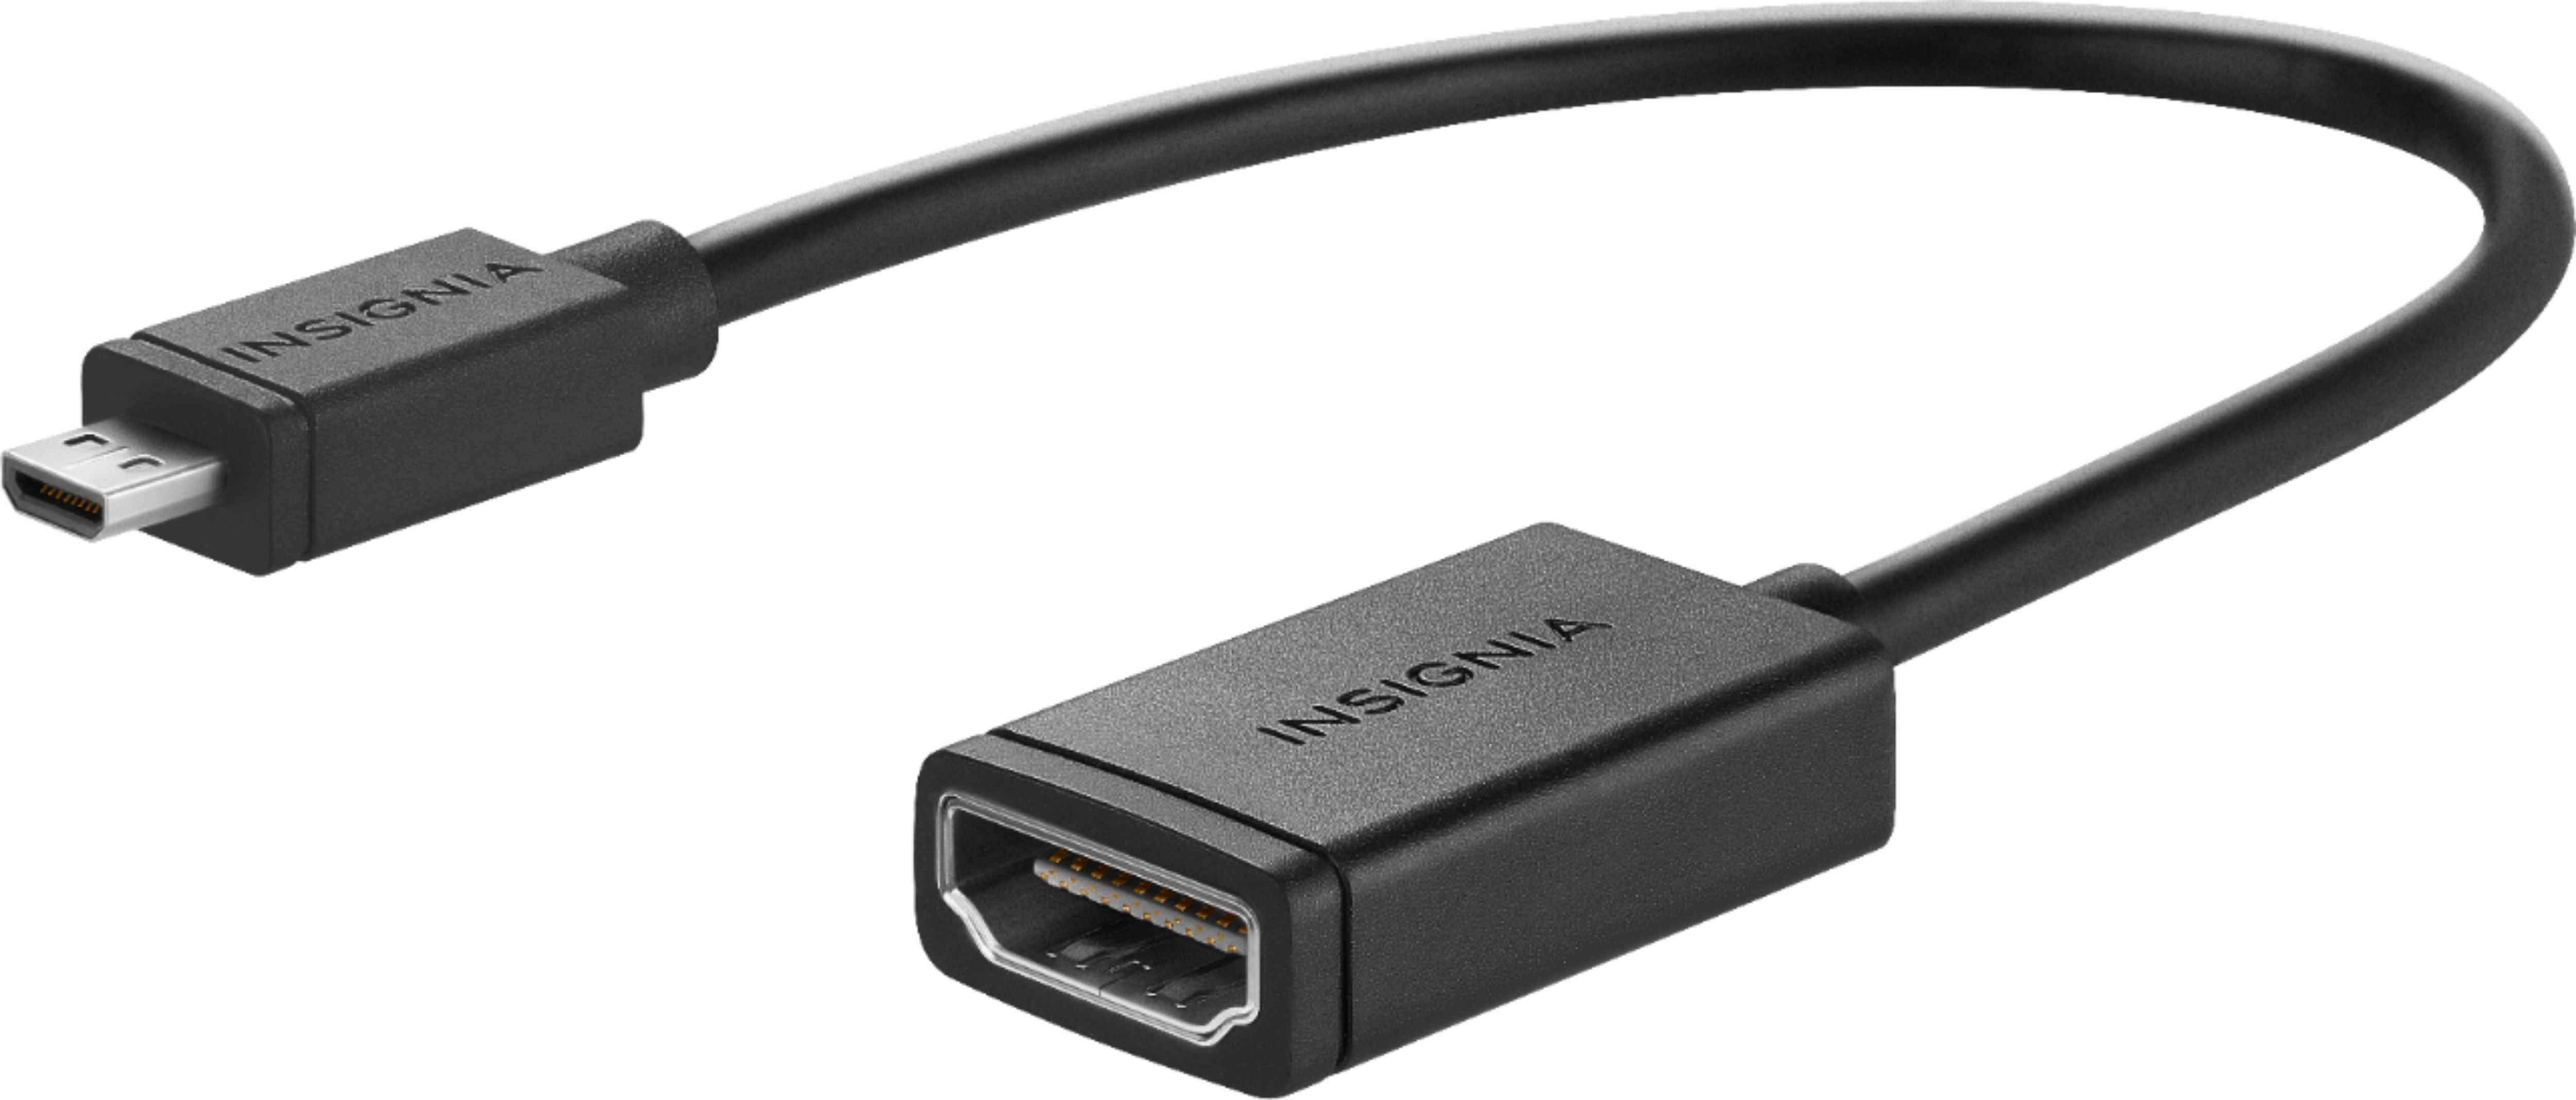 Selv tak Lagring Høring Insignia™ Micro HDMI to HDMI Adapter Black NS-HG1182 - Best Buy